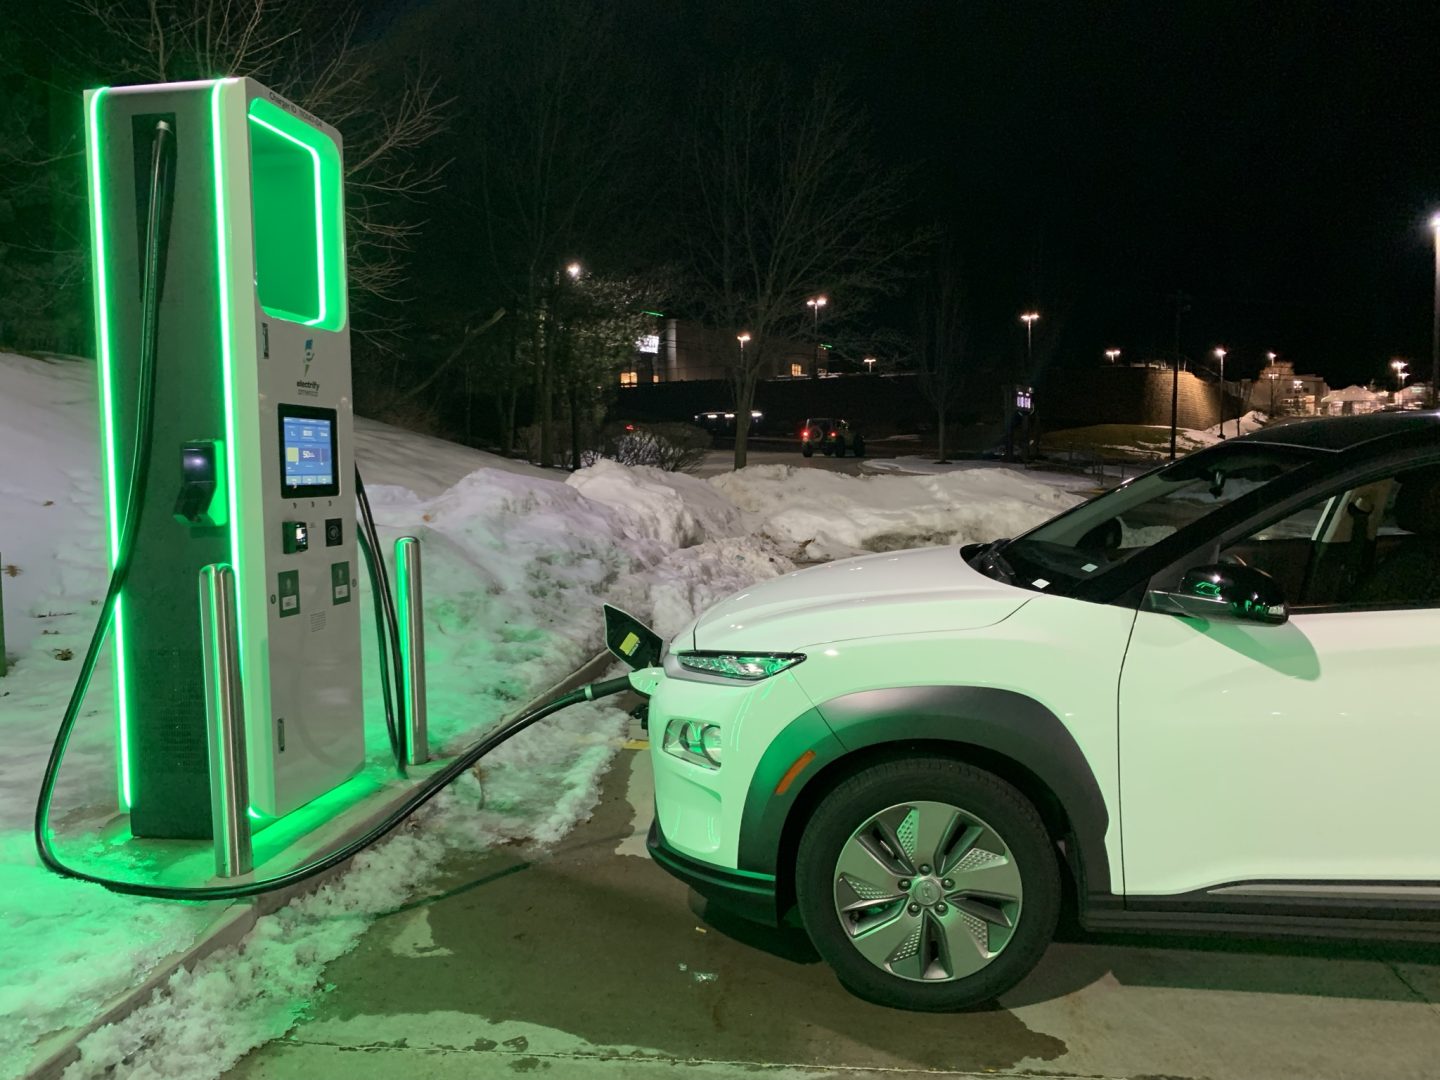 The Growing Need for Faster Charging and Widespread Availability of EV Charging Stations: Solutions to Overcoming Range Anxiety